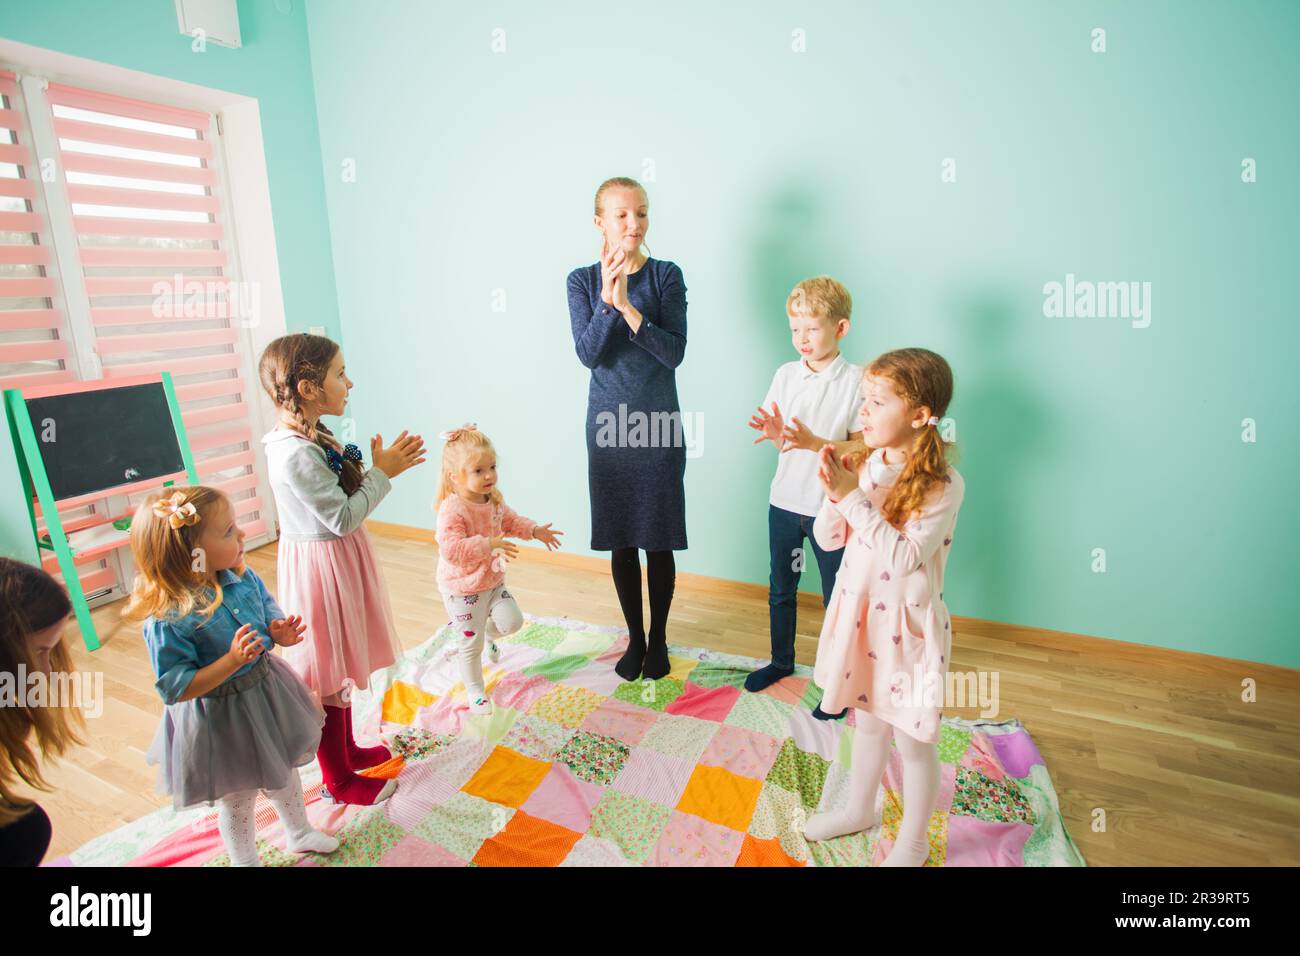 Children sing a song with a teacher together. Kids in a nursery. Stock Photo